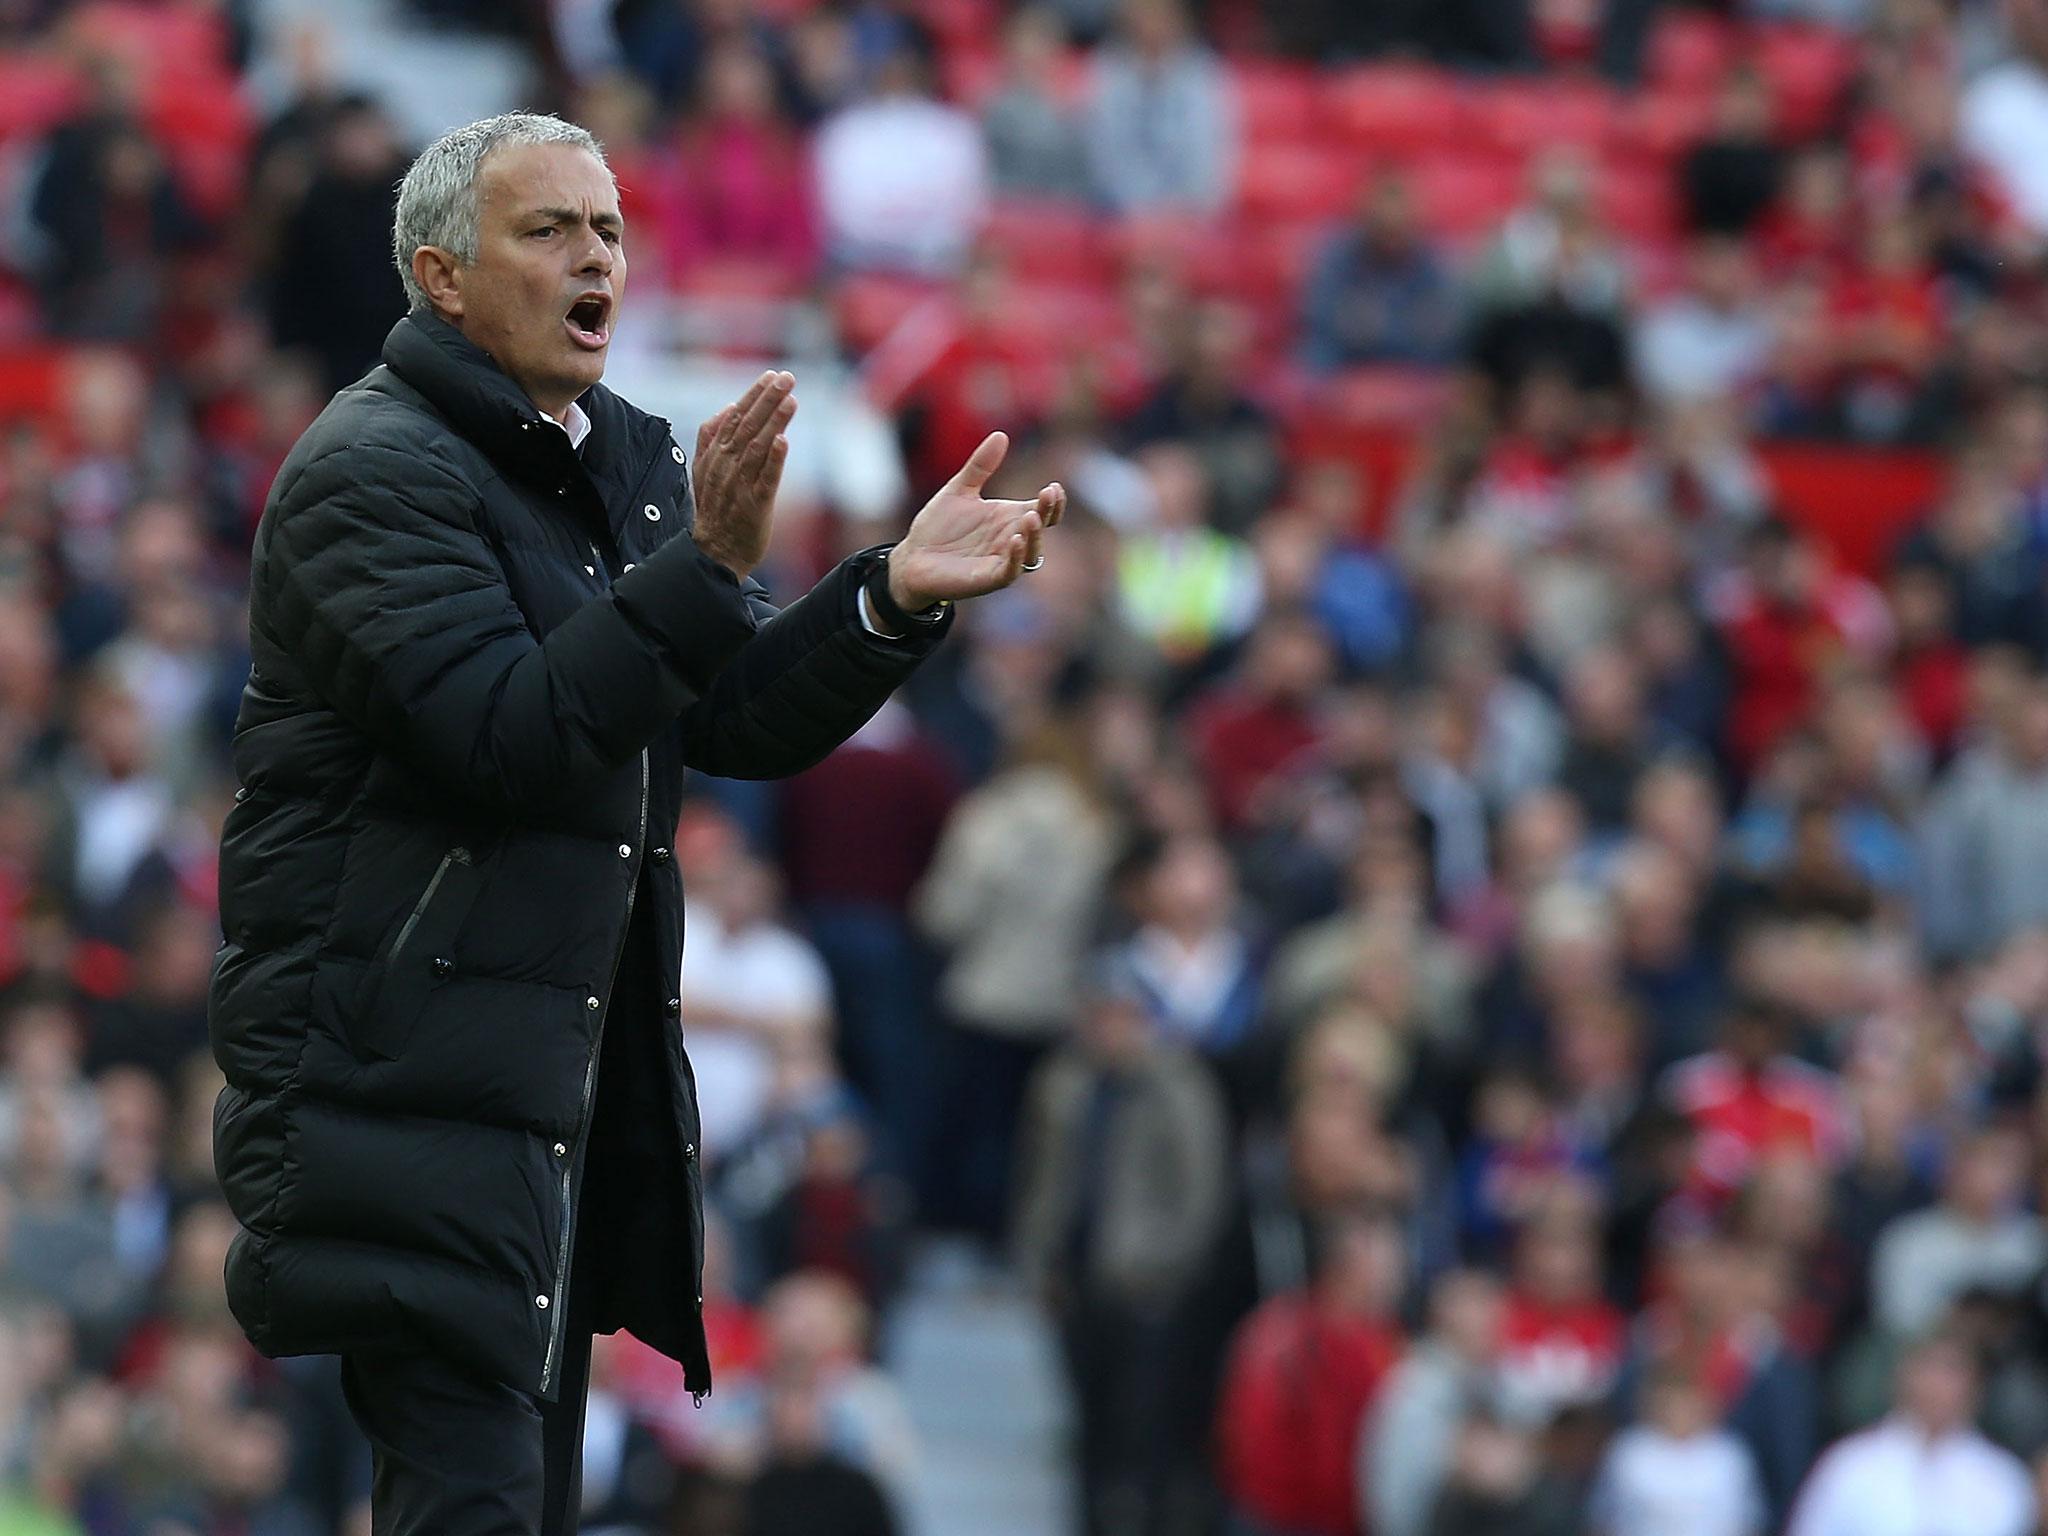 The FA are expected to decide on Mourinho’s latest alleged breach of the rules later this week